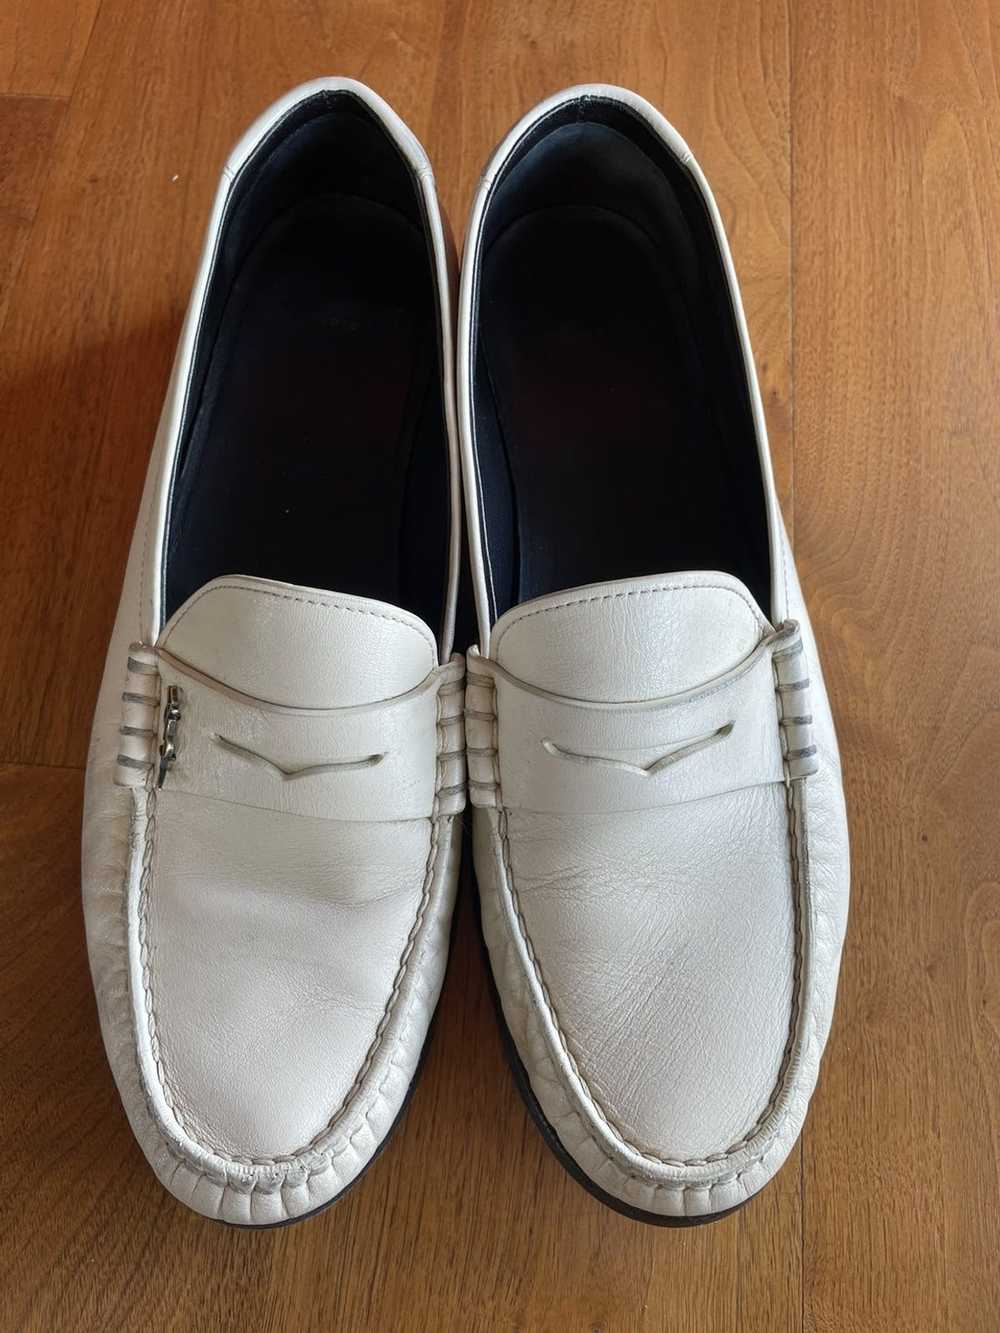 Yves Saint Laurent YSL White Leather Loafers - image 1